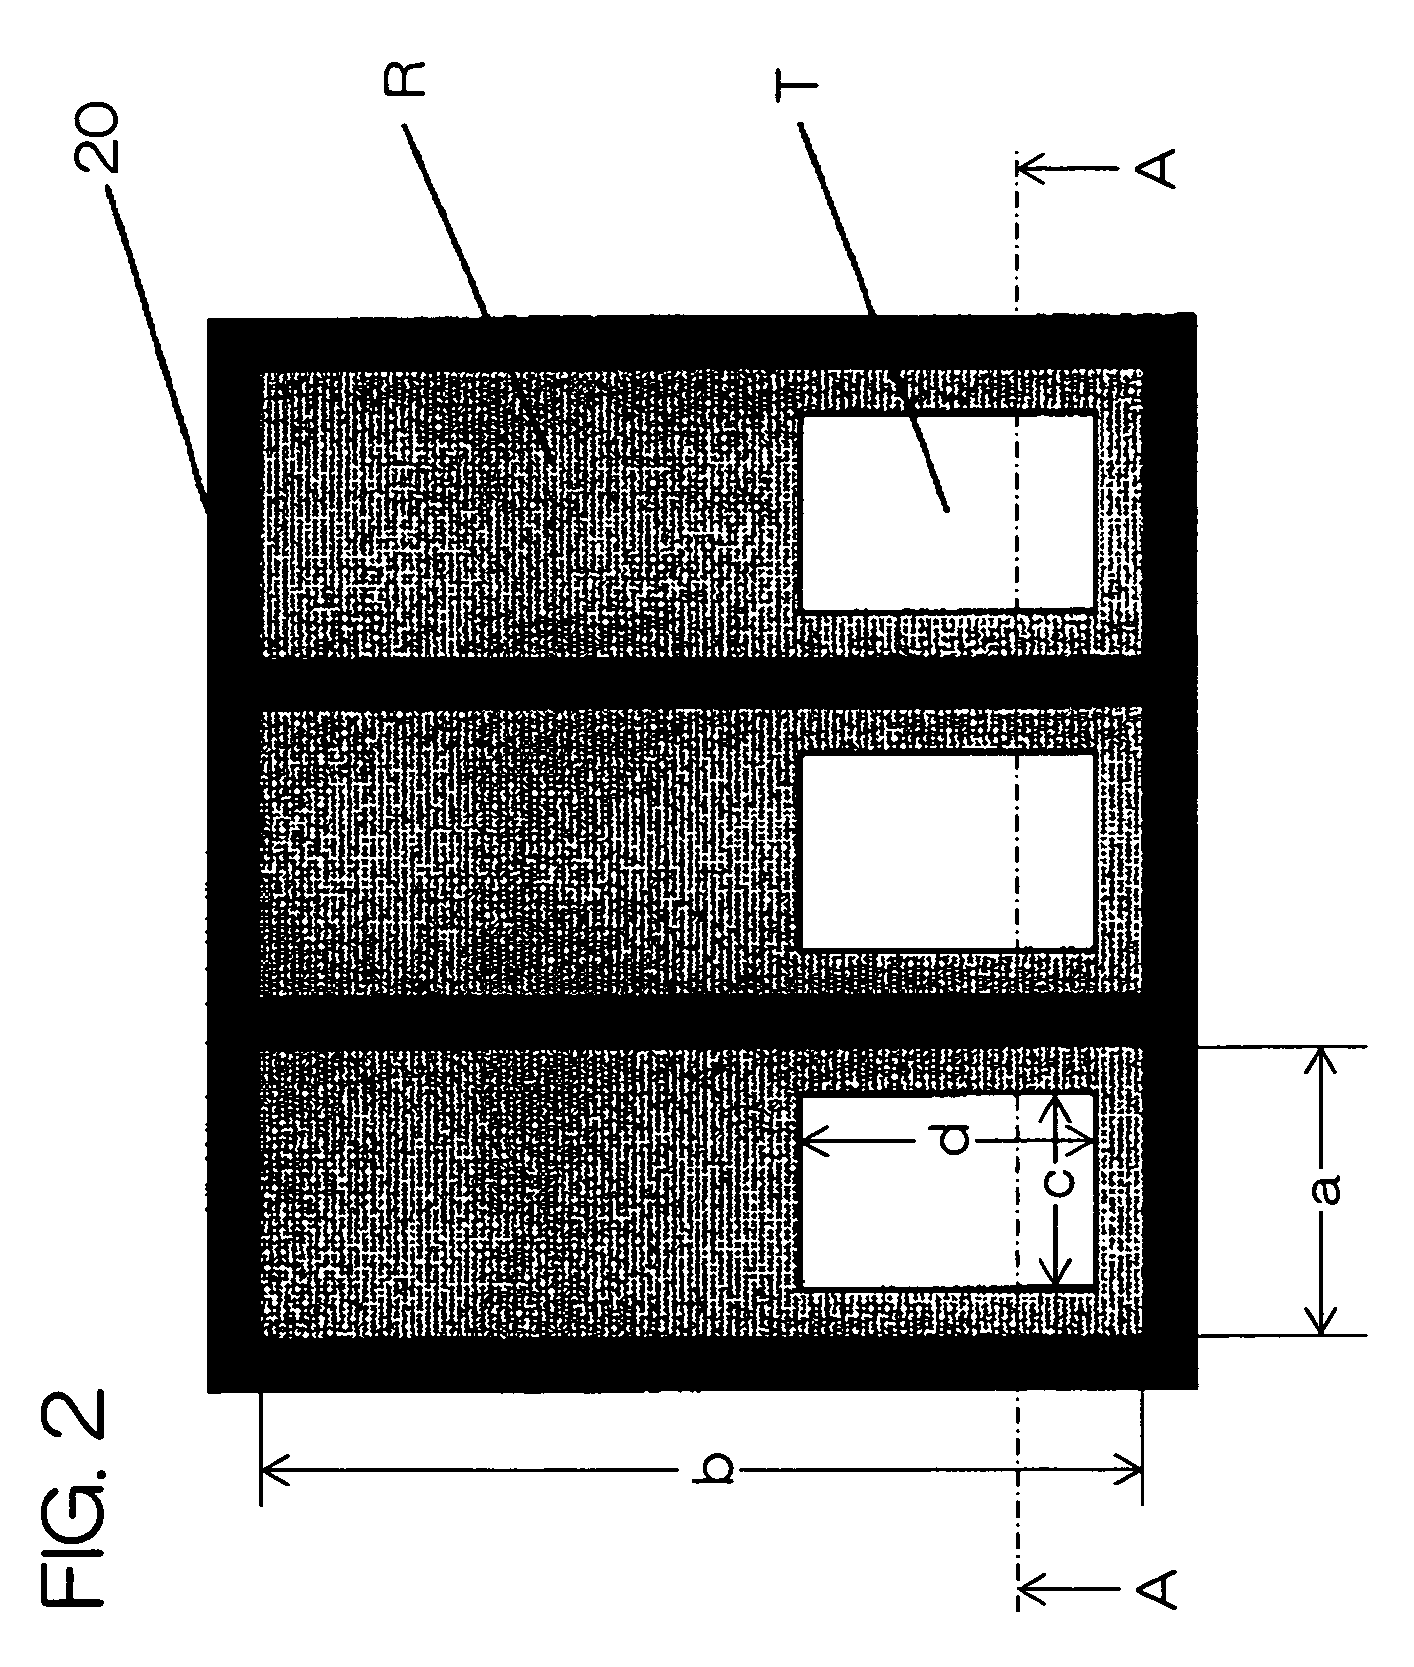 Liquid crystal display device having black and transparent spacers in the transmissive region